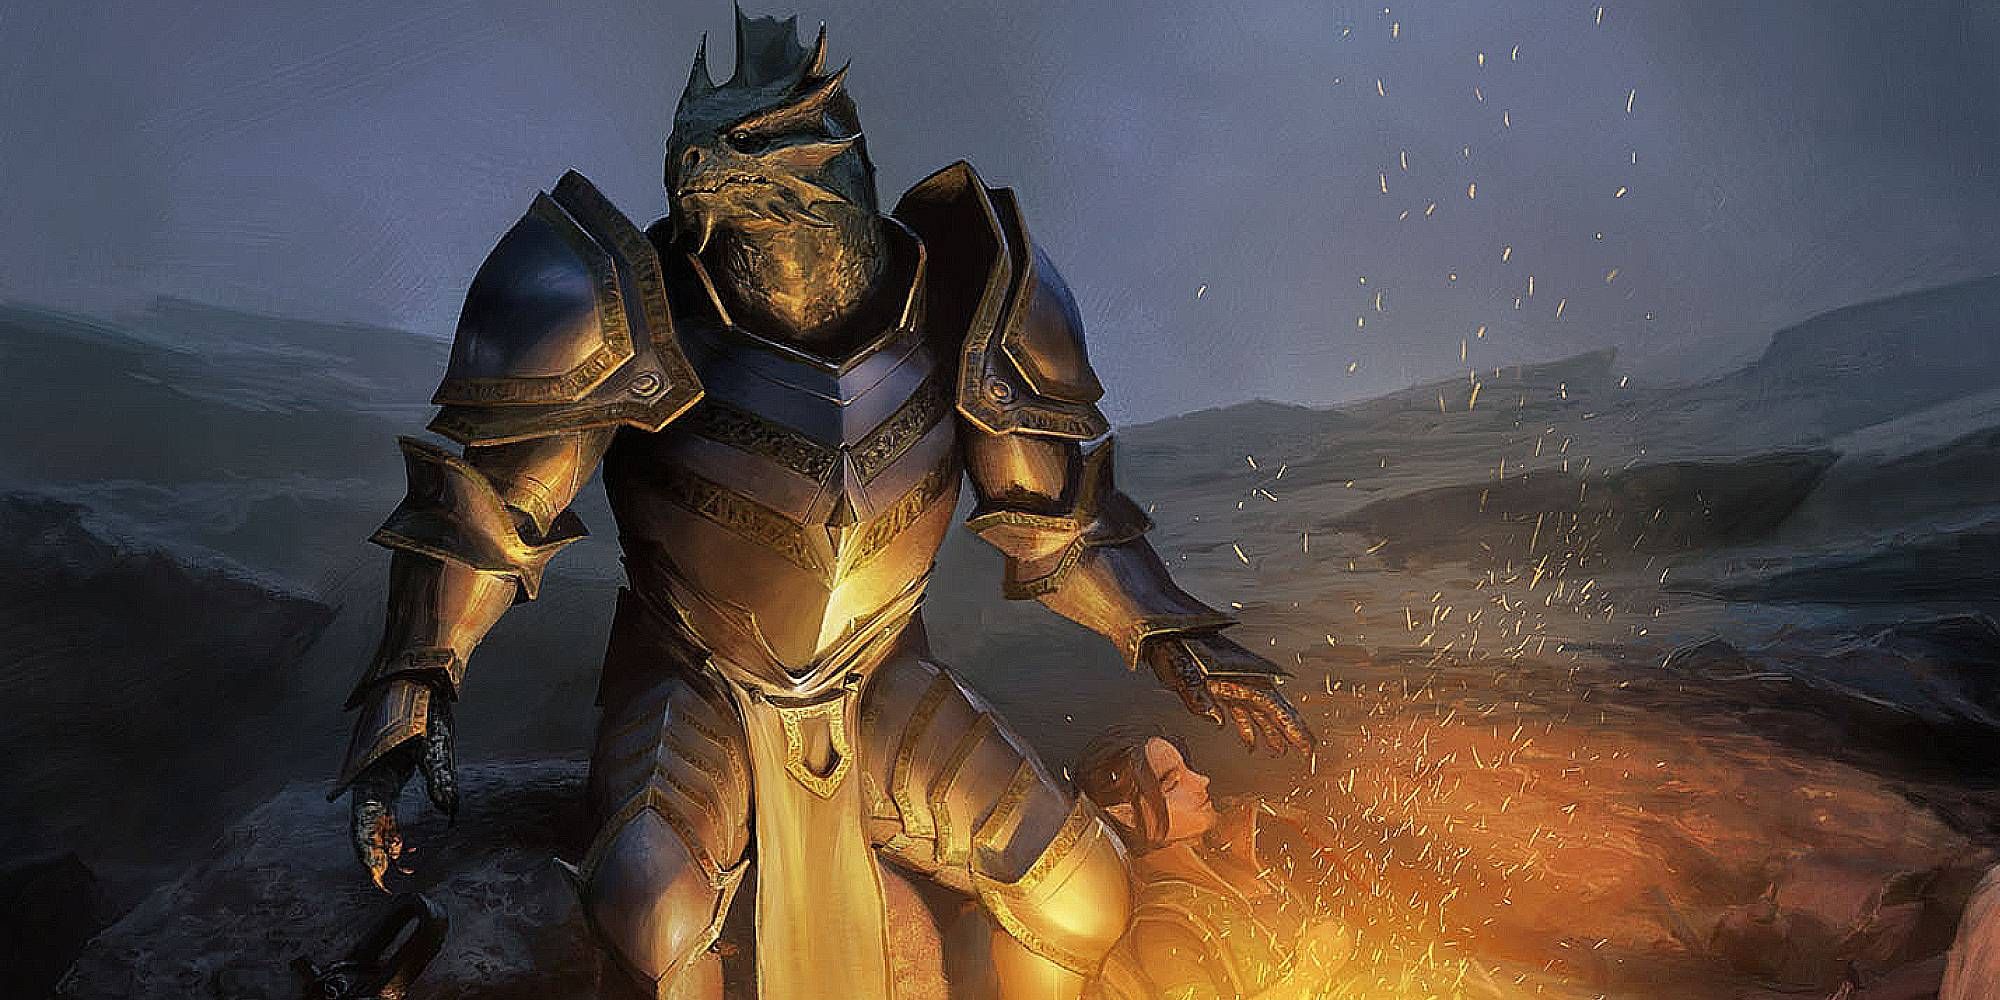 A reptillian humanoid in steel armour looks elsewhere at a campfire